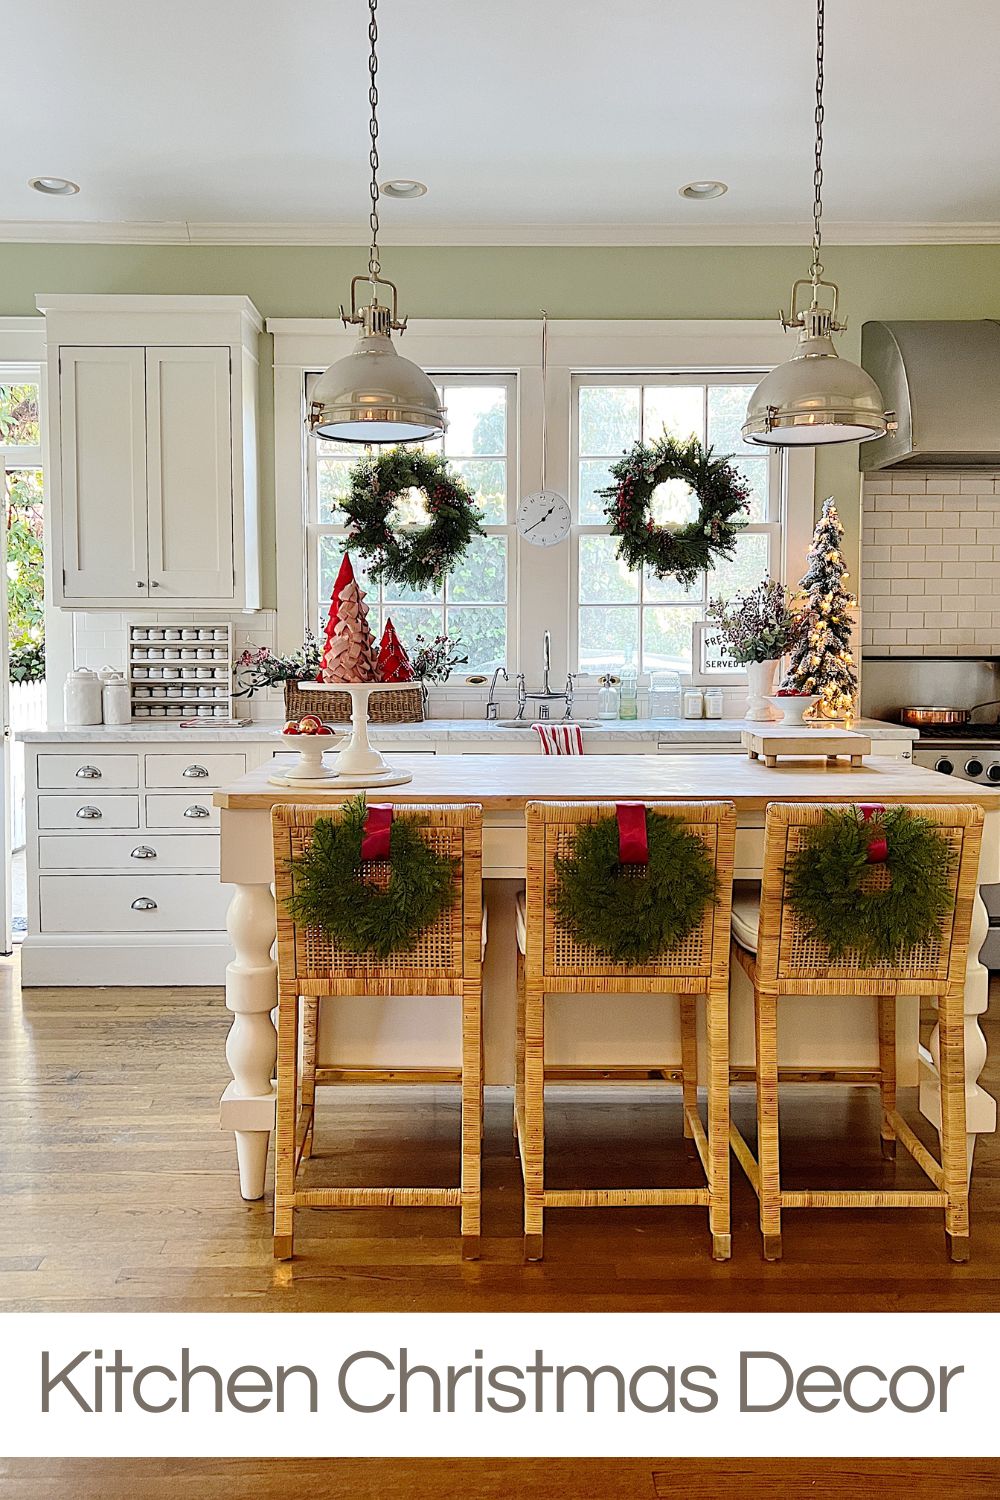 The holiday season is a time of warmth and joy, and I love to embody this spirit in the heart of the home with kitchen Christmas decor.